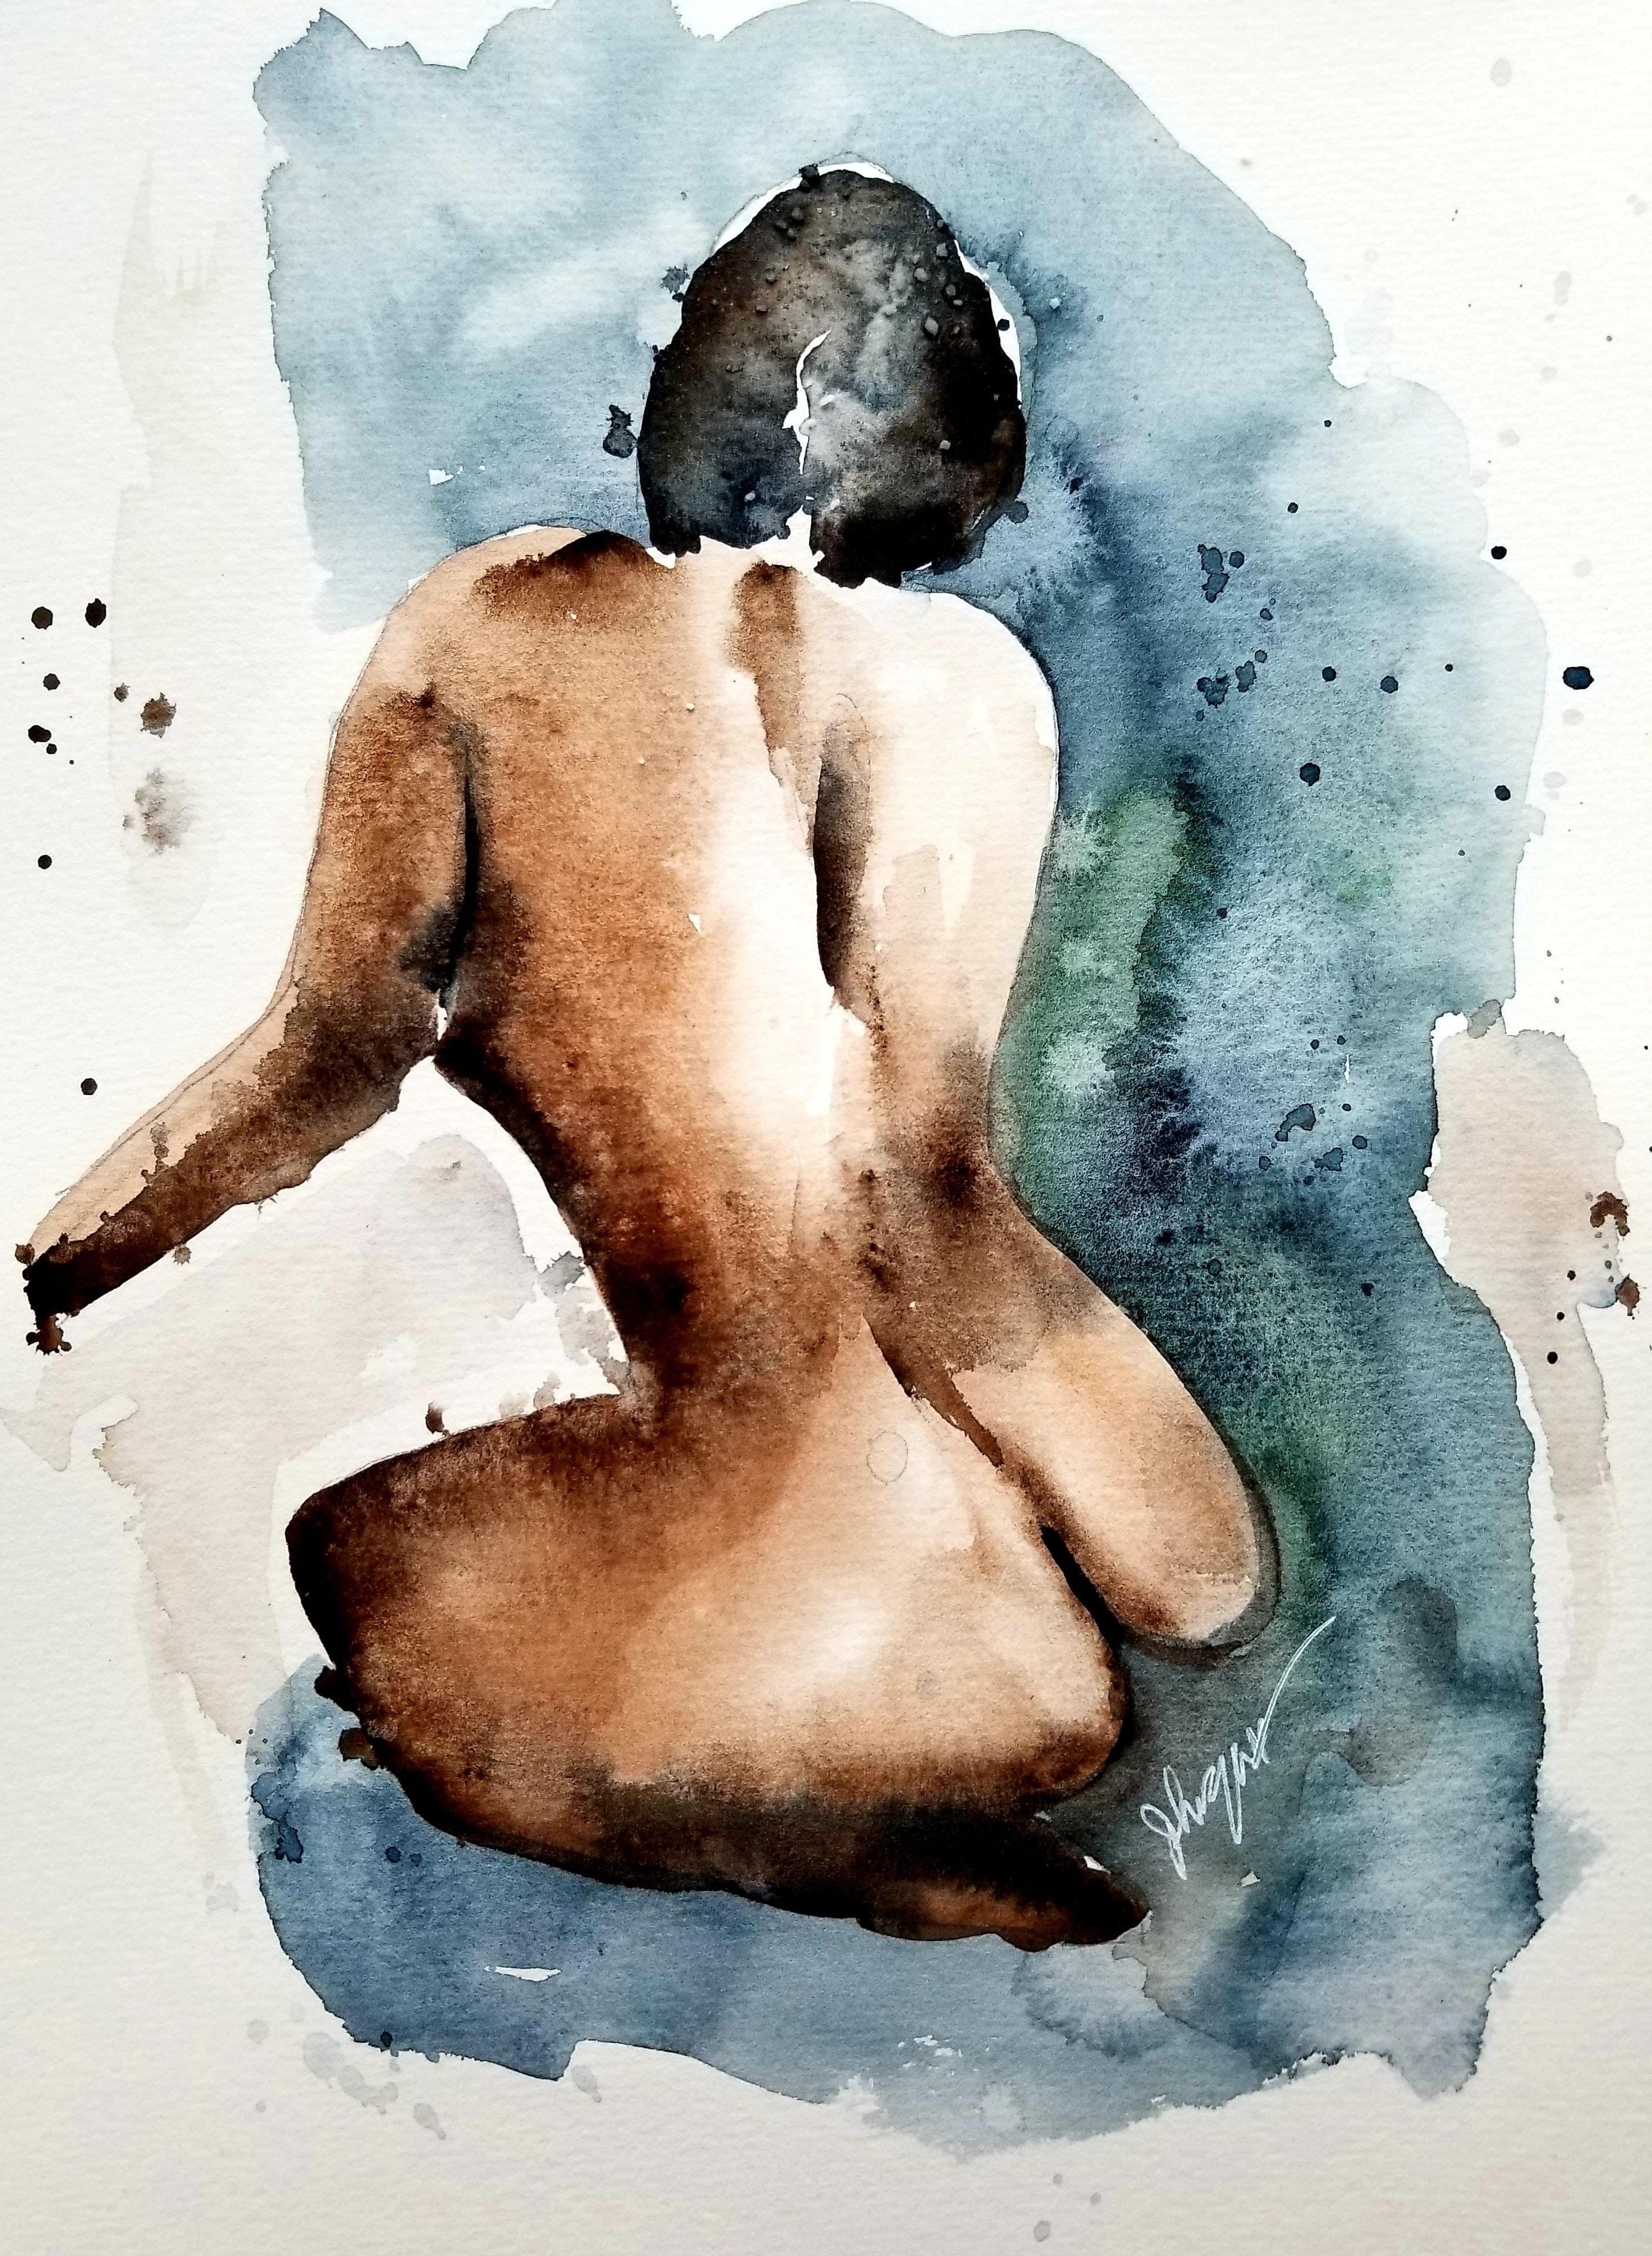 Nude Woman, Painting, Watercolor on Watercolor Paper - Art by Jim Lagasse